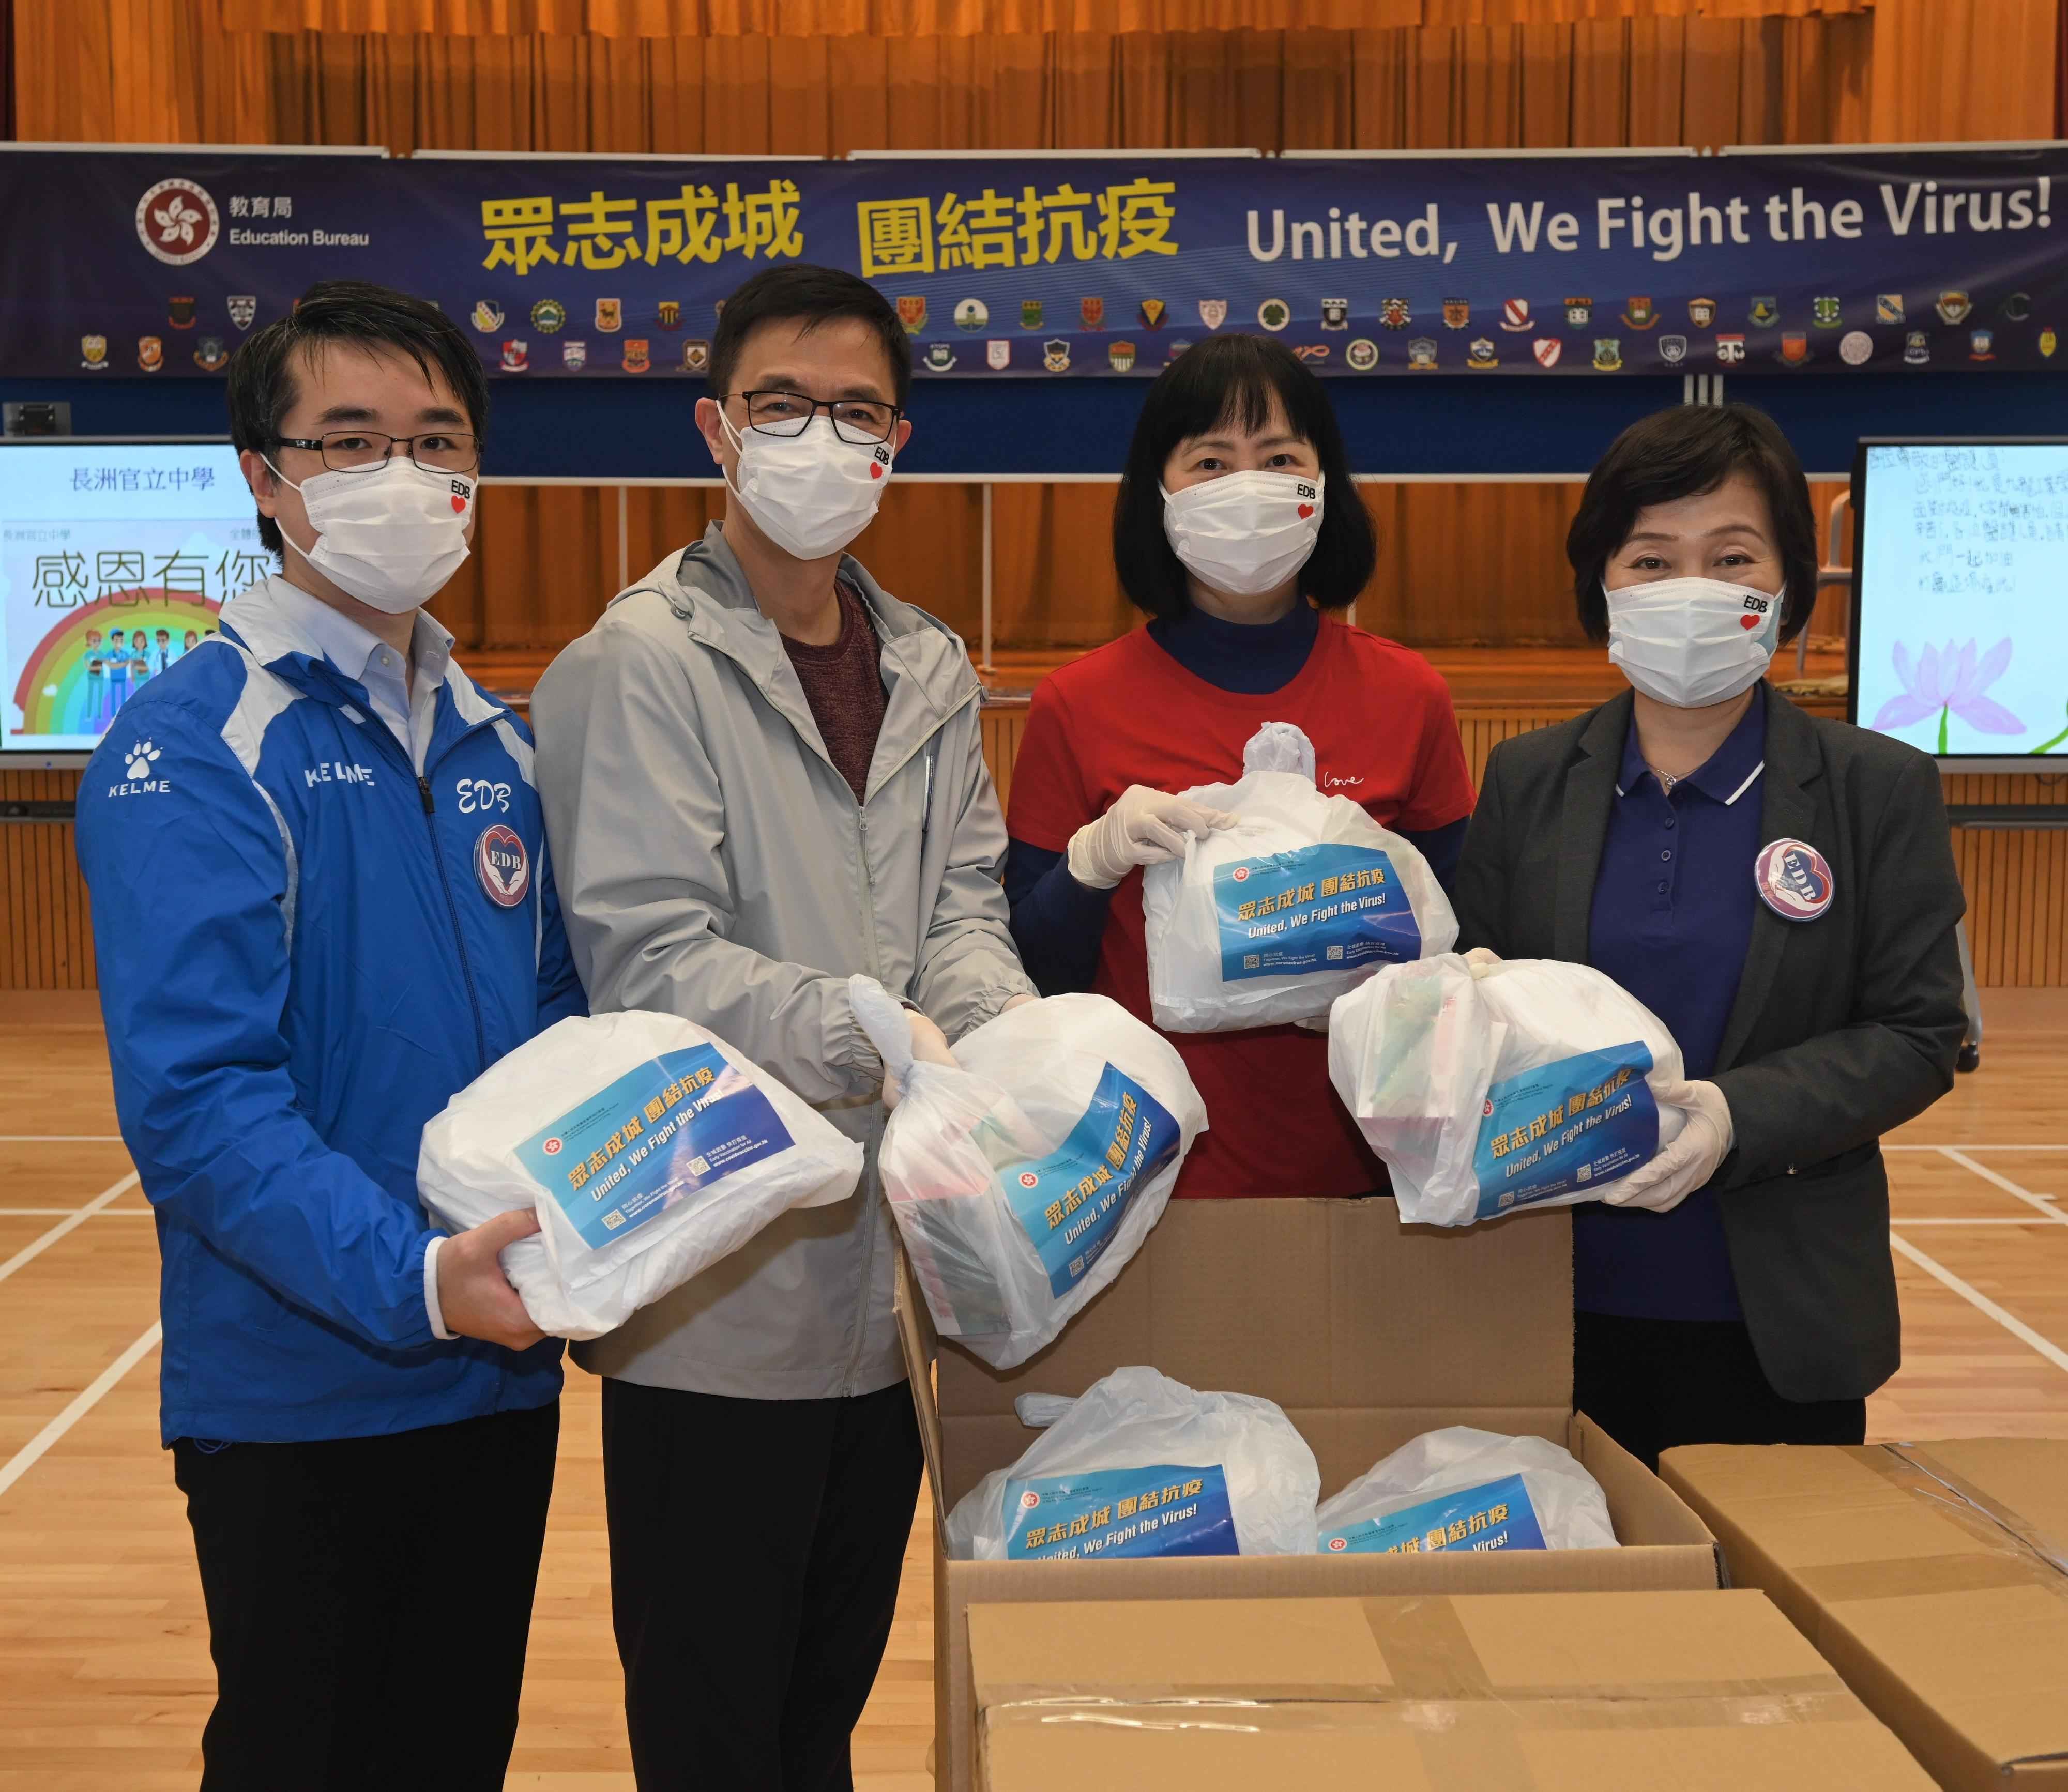 The Secretary for Education, Mr Kevin Yeung, visited a packaging centre for anti-epidemic service bags operated by staff members of the Education Bureau in Queen Elizabeth School today (March 30). Picture shows Mr Yeung (second left); the Permanent Secretary for Education, Ms Michelle Li (second right); the Under Secretary for Education, Dr Christine Choi (first right); and the Political Assistant to the Secretary for Education, Mr Jeff Sze (first left), taking part in the work.
